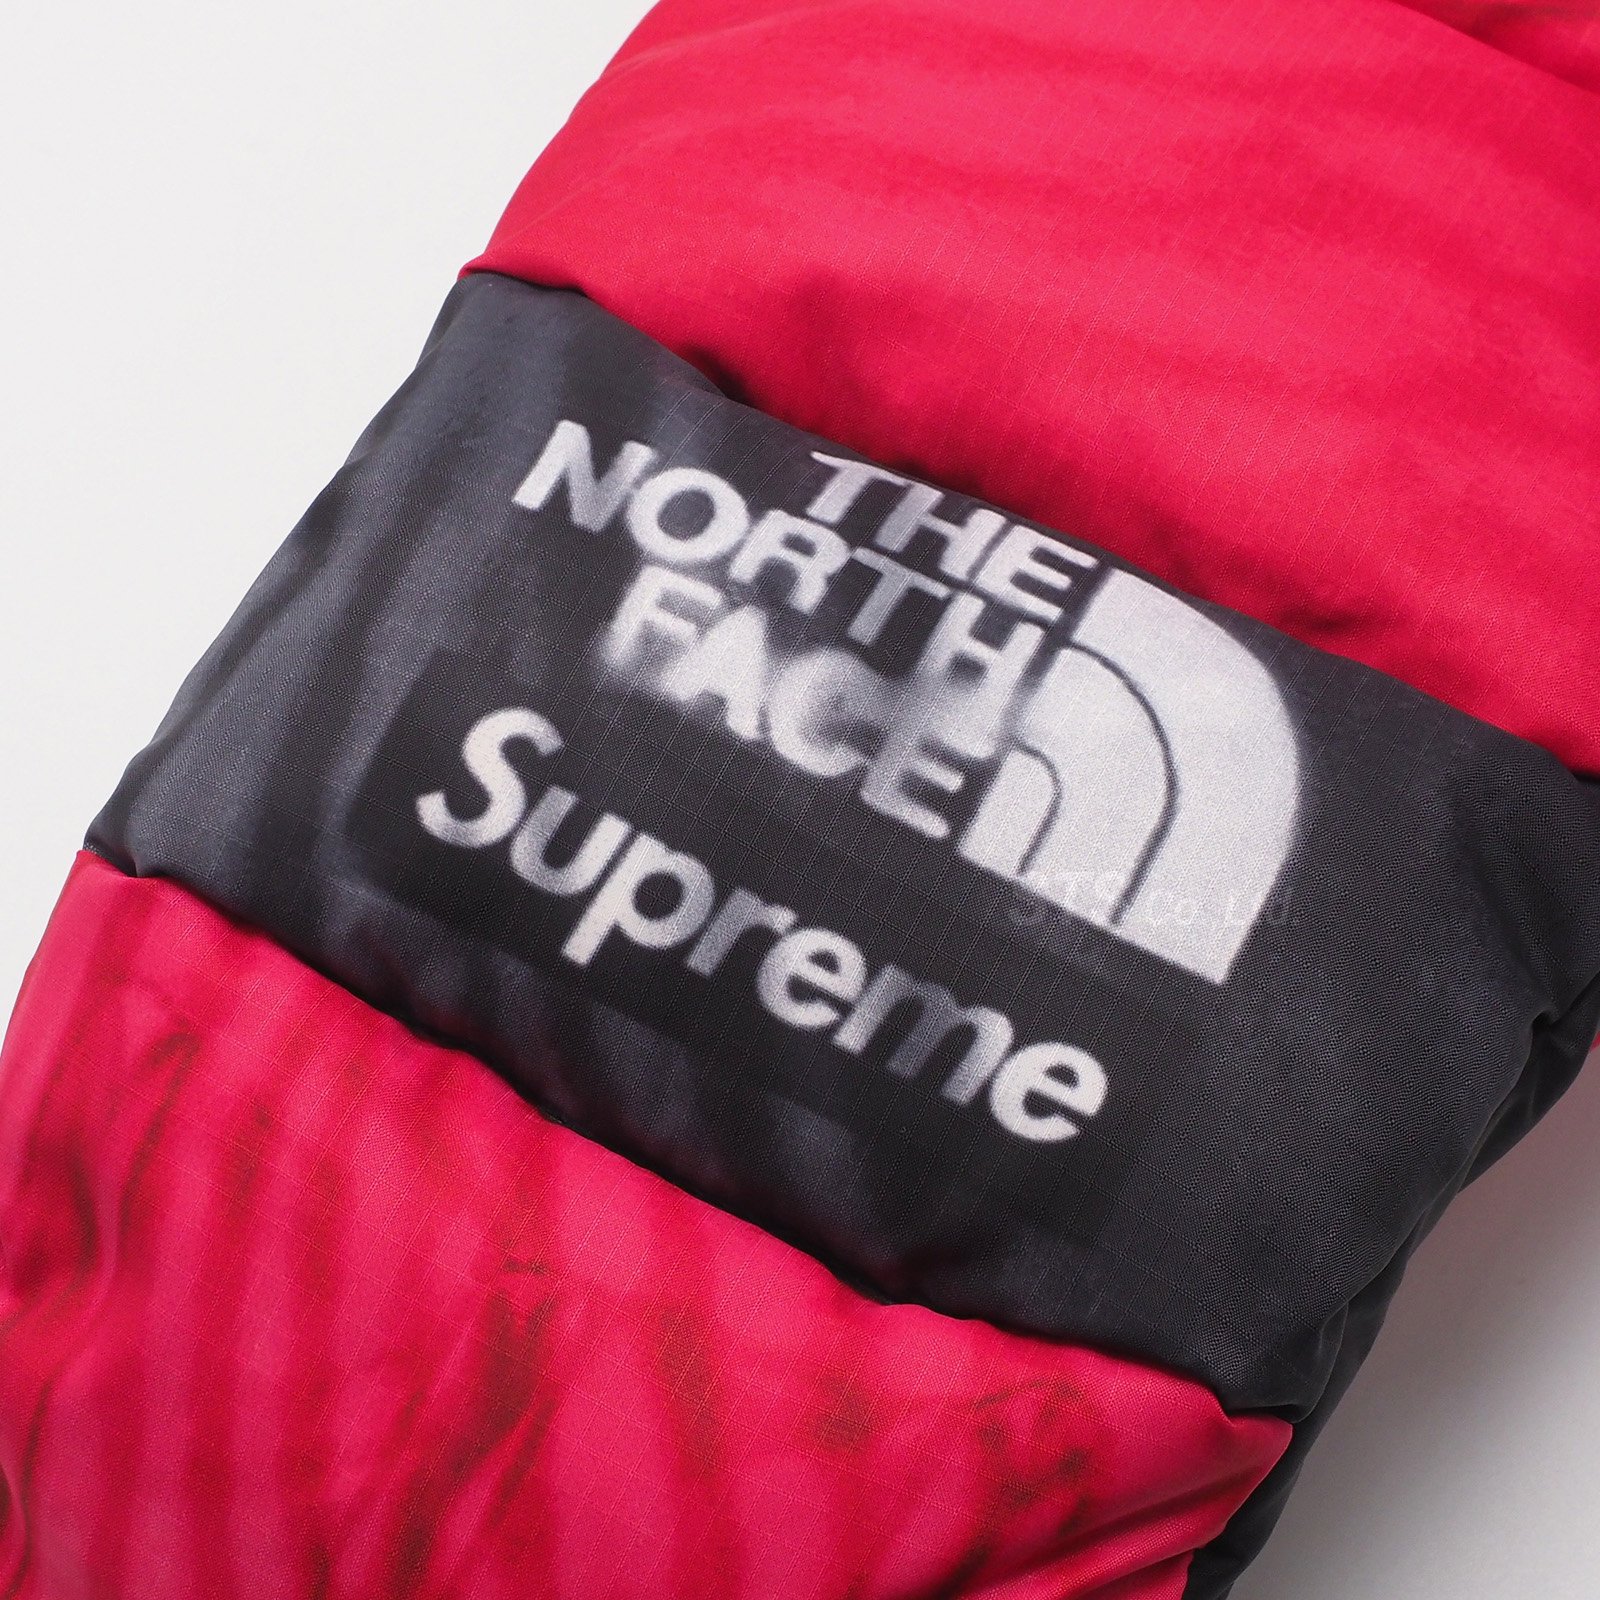 Supreme/The North Face Trompe L'oeil Printed Mountain Mitt - ParkSIDER